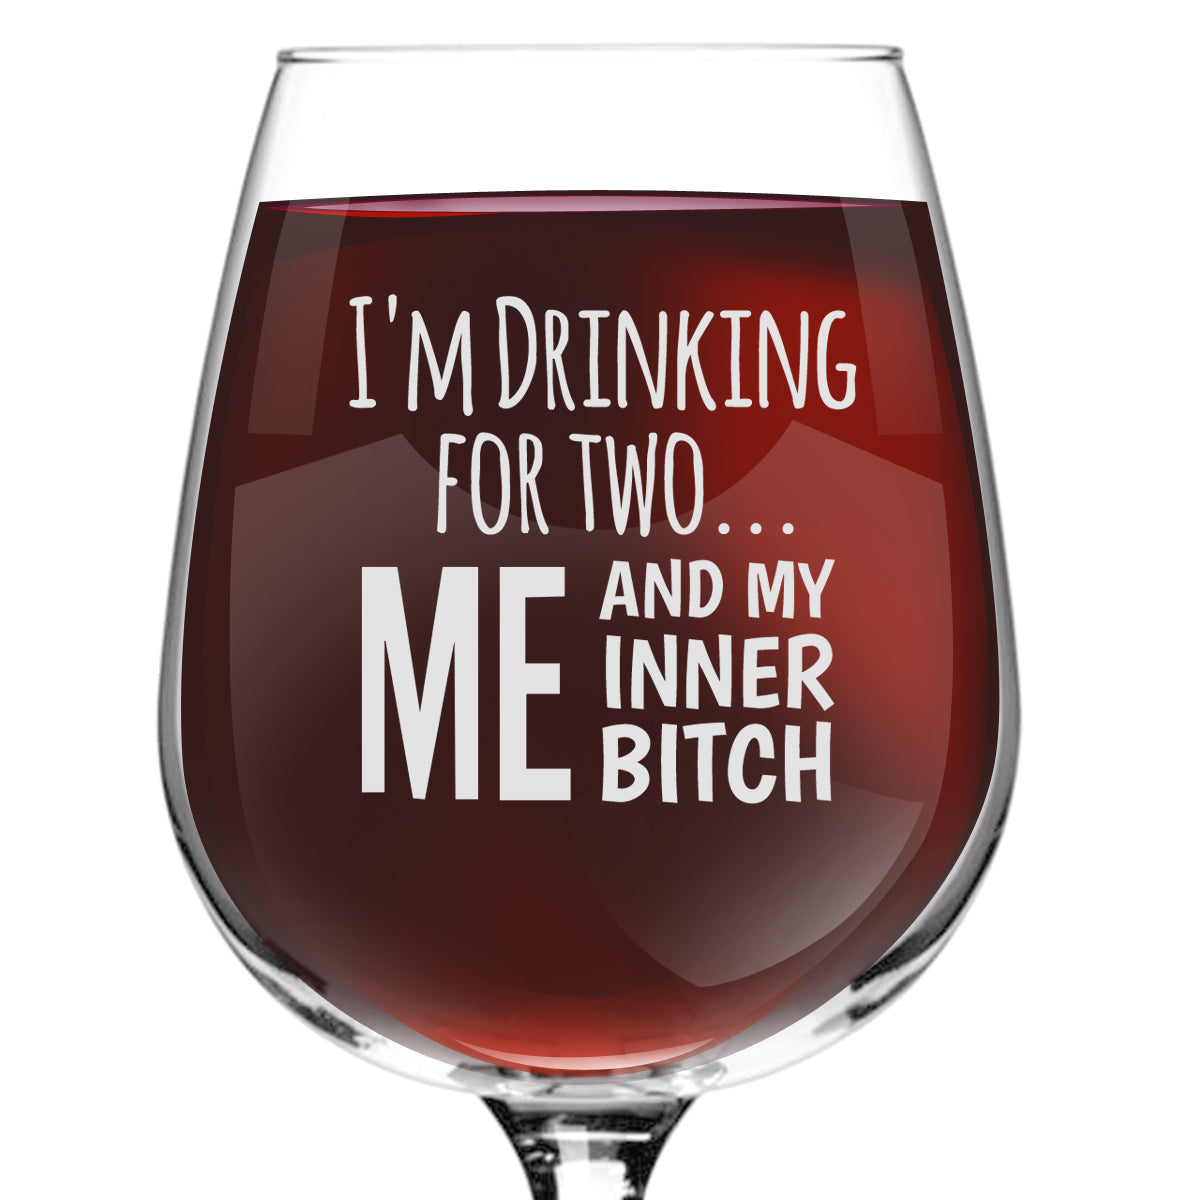 I M Drinking For Two Me And My Inner Btch Funny Wine